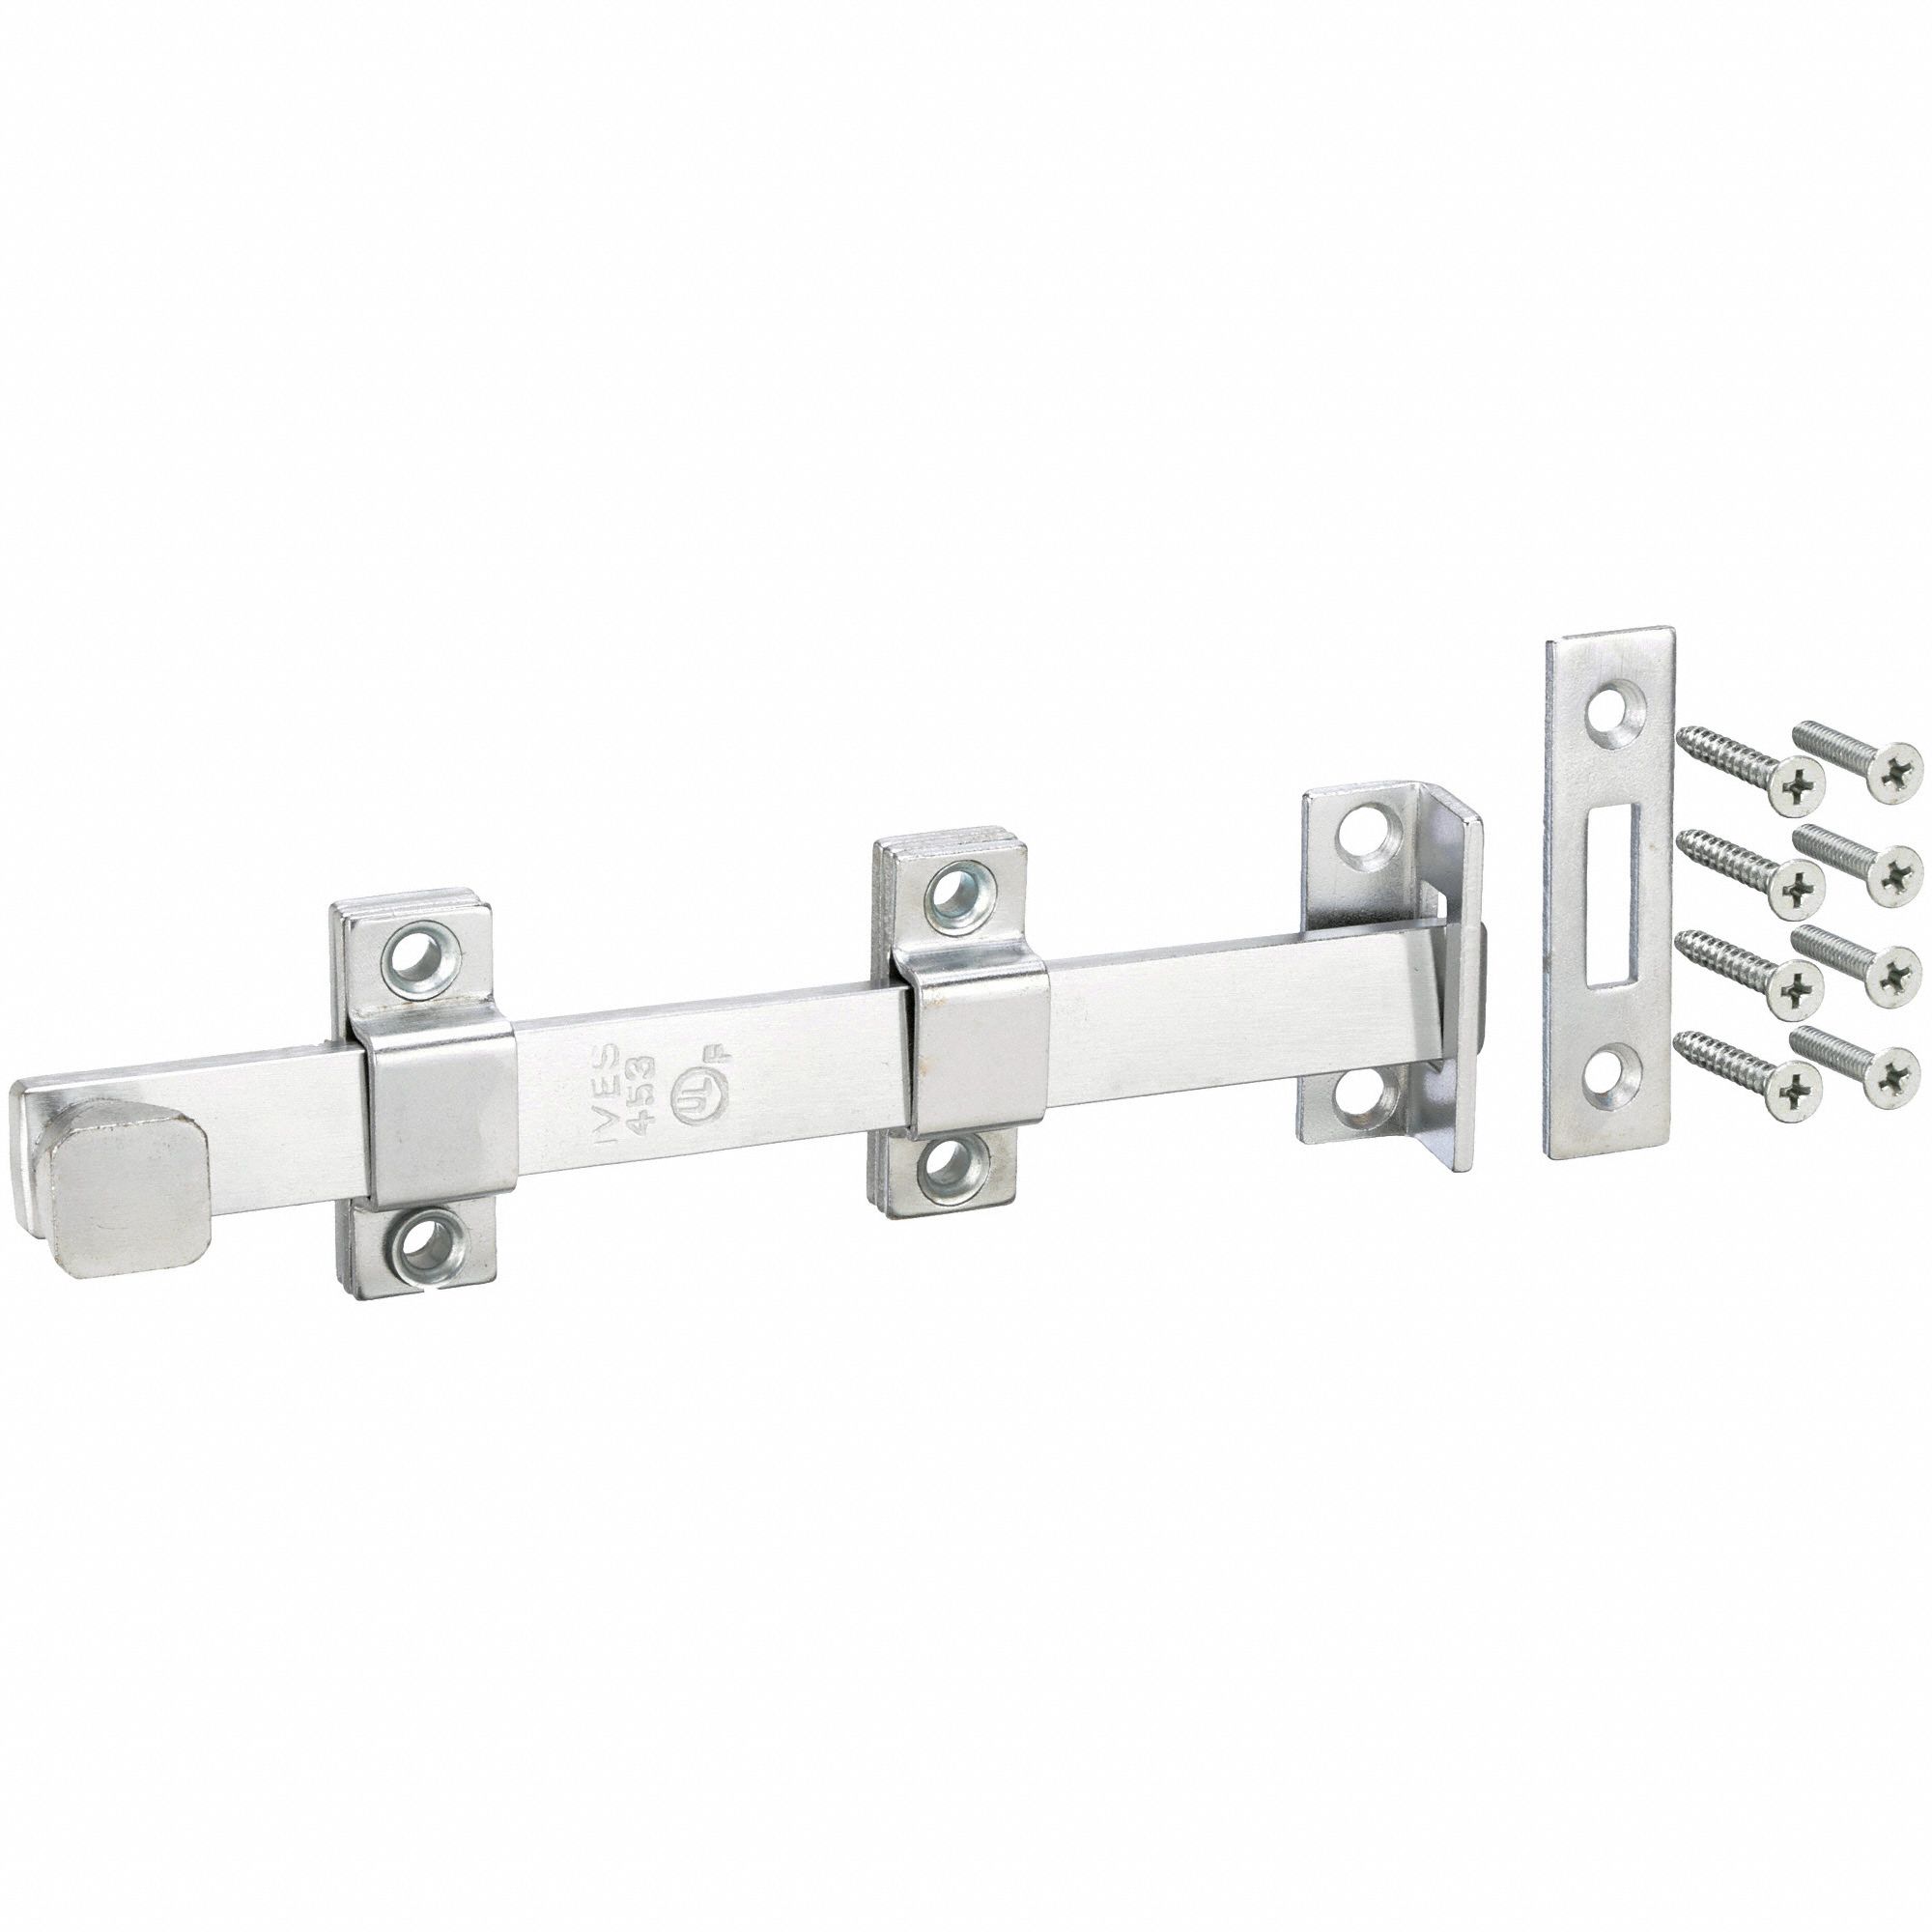 8 in Prime-Line MP4914 Surface Bolt Steel Brushed Chrome Finish 1 Set Heavy Duty Construction